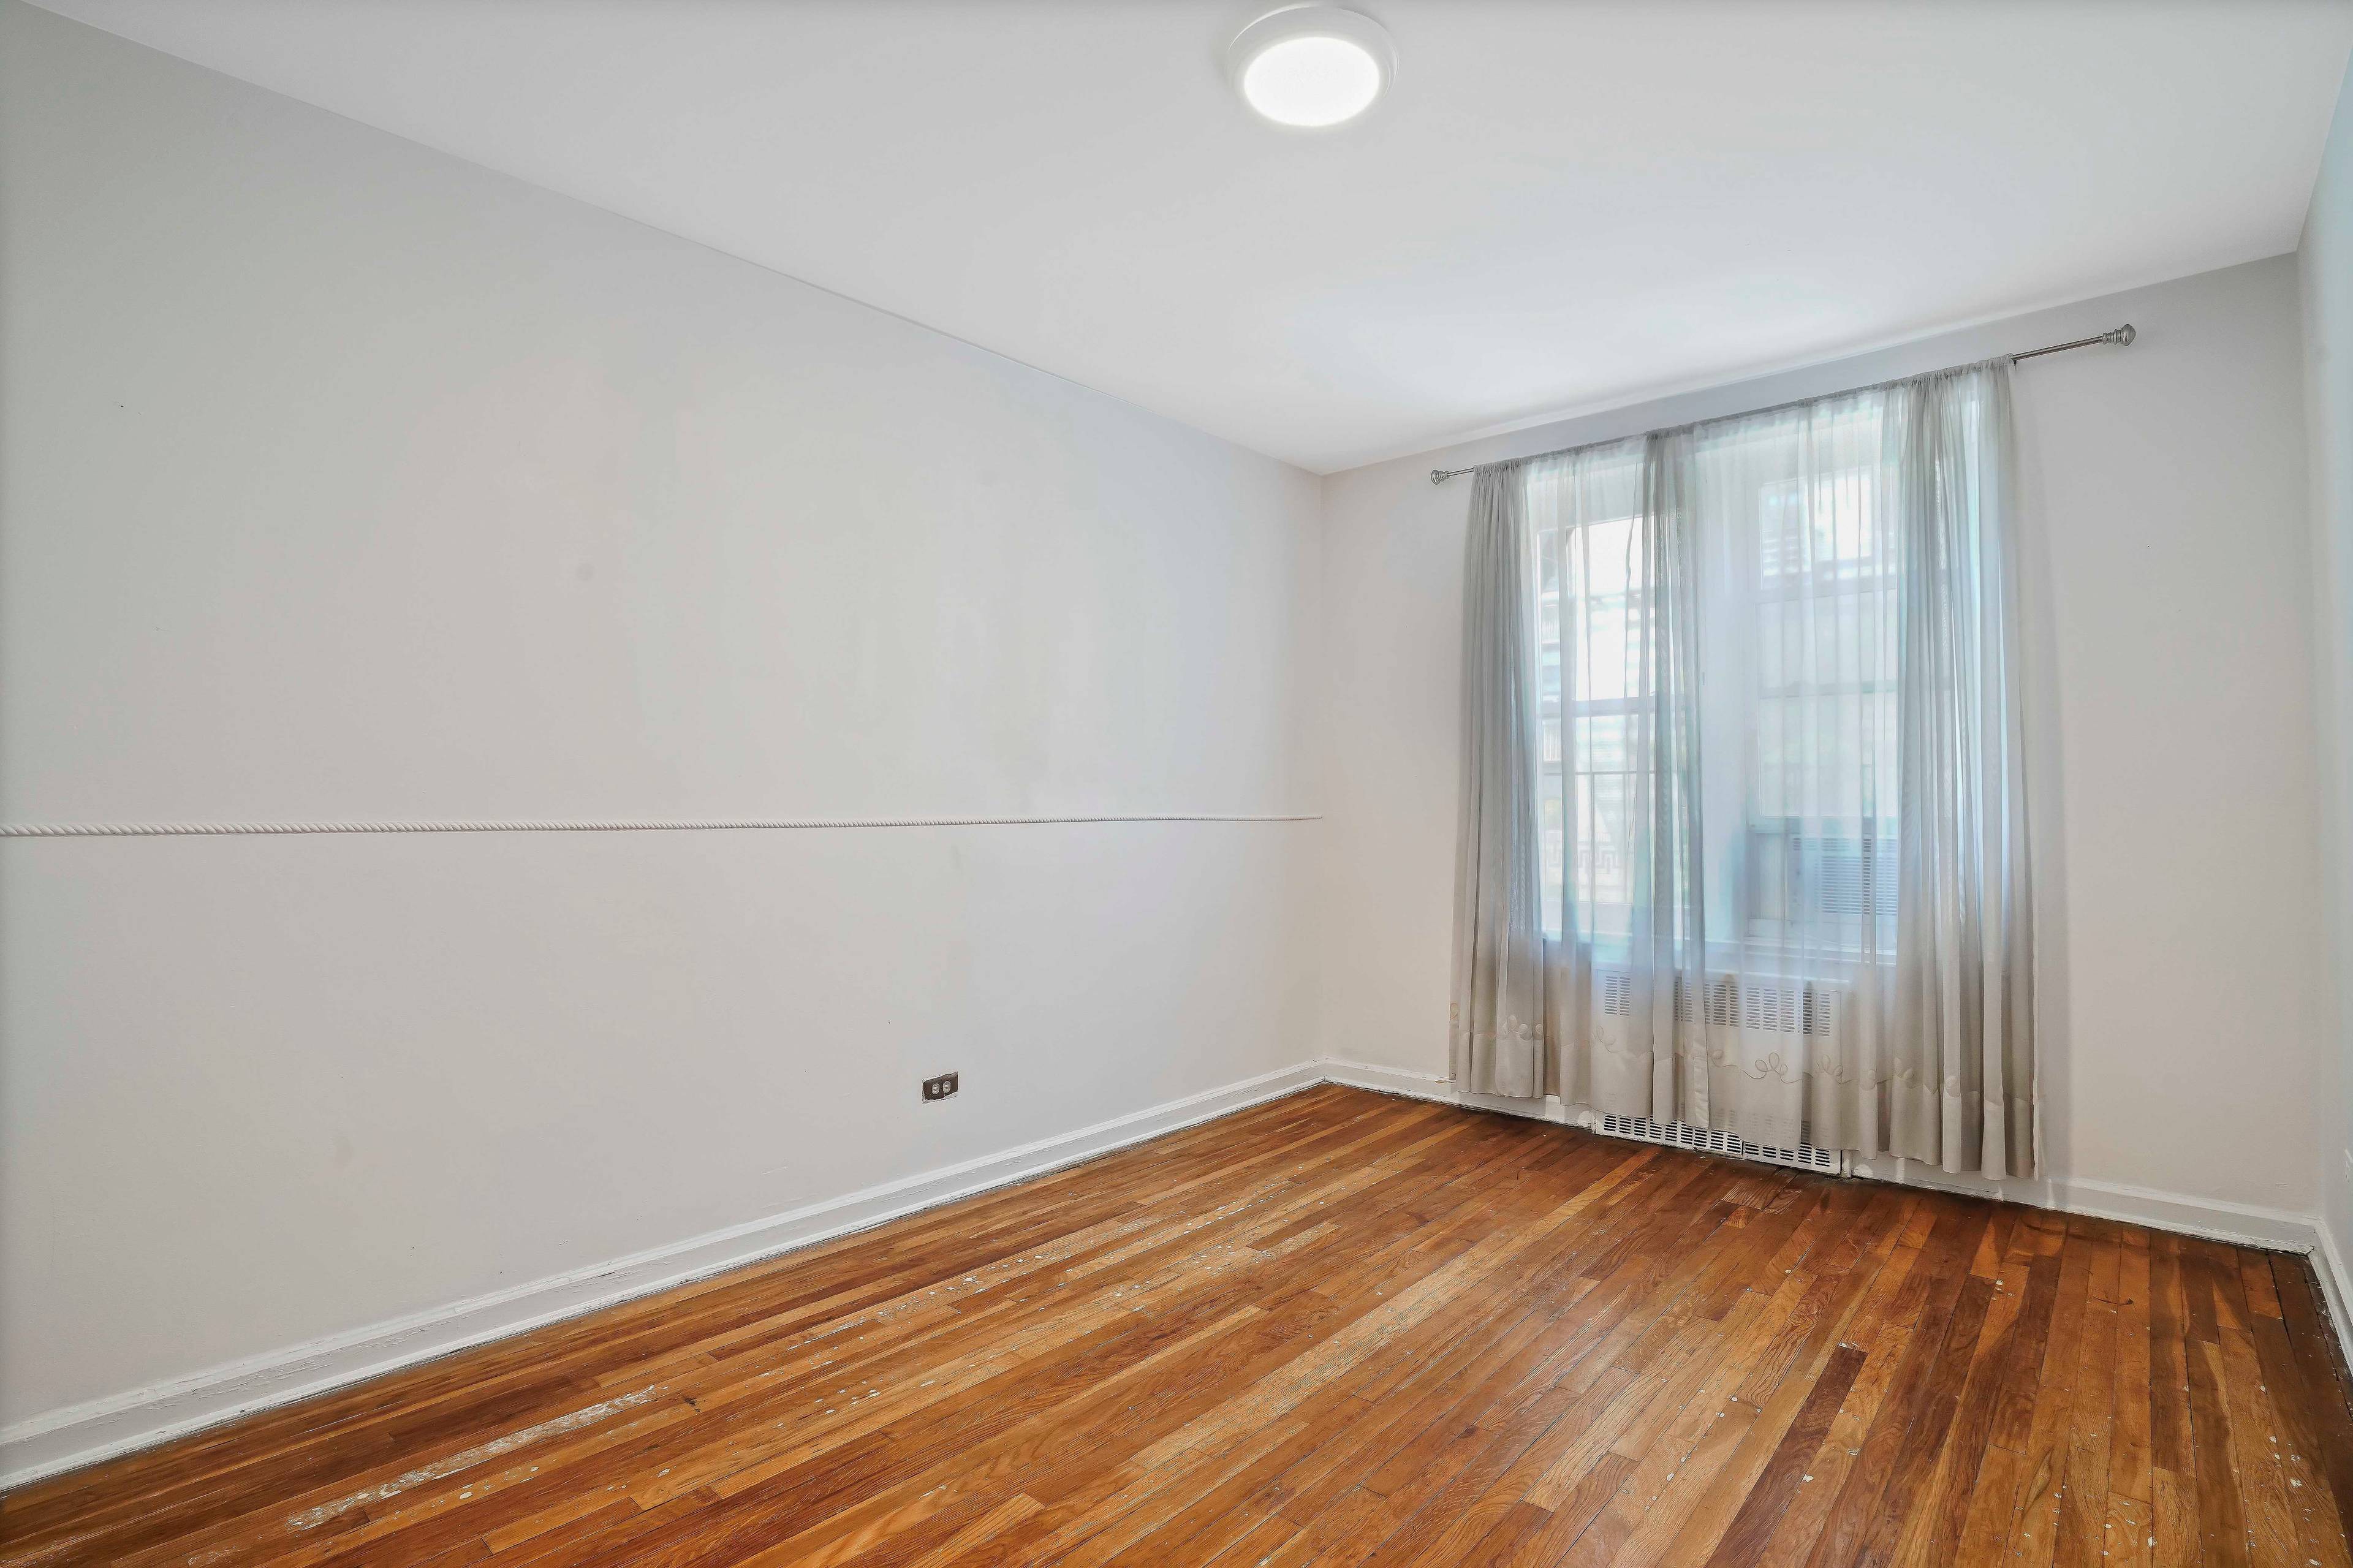 Very bright and spacious apartment in a well managed Co op building and on site super.